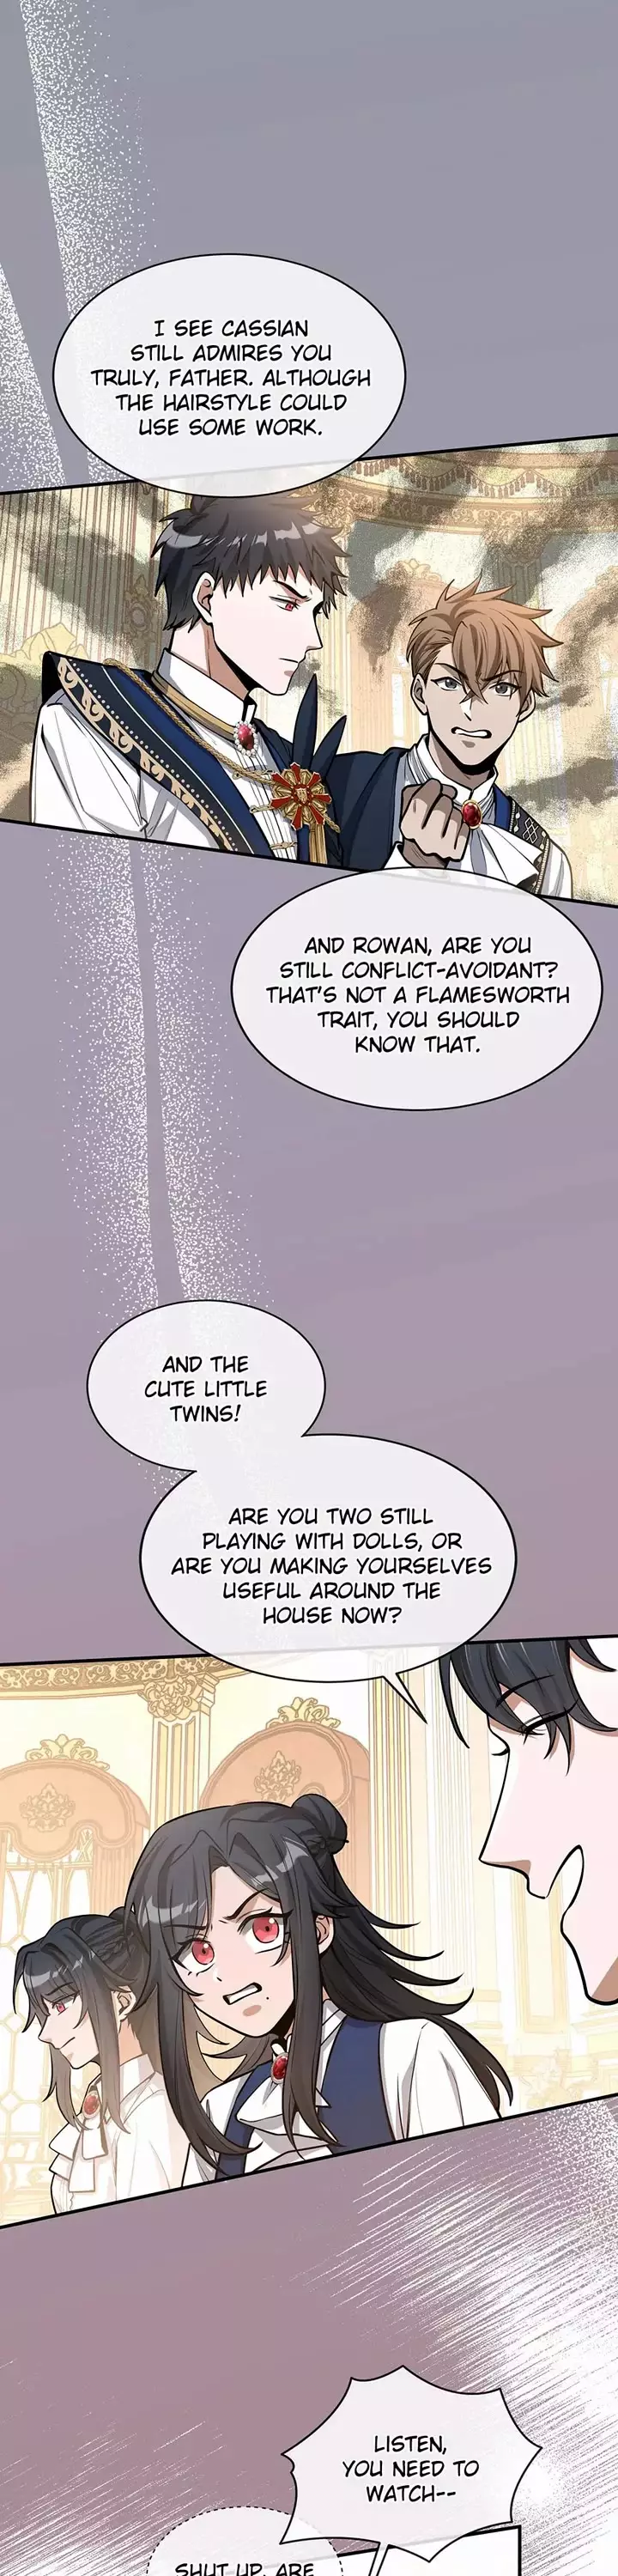 The Beginning After The End: Side Story - Jasmine: Wind-Borne - 7 page 28-1911d2f3